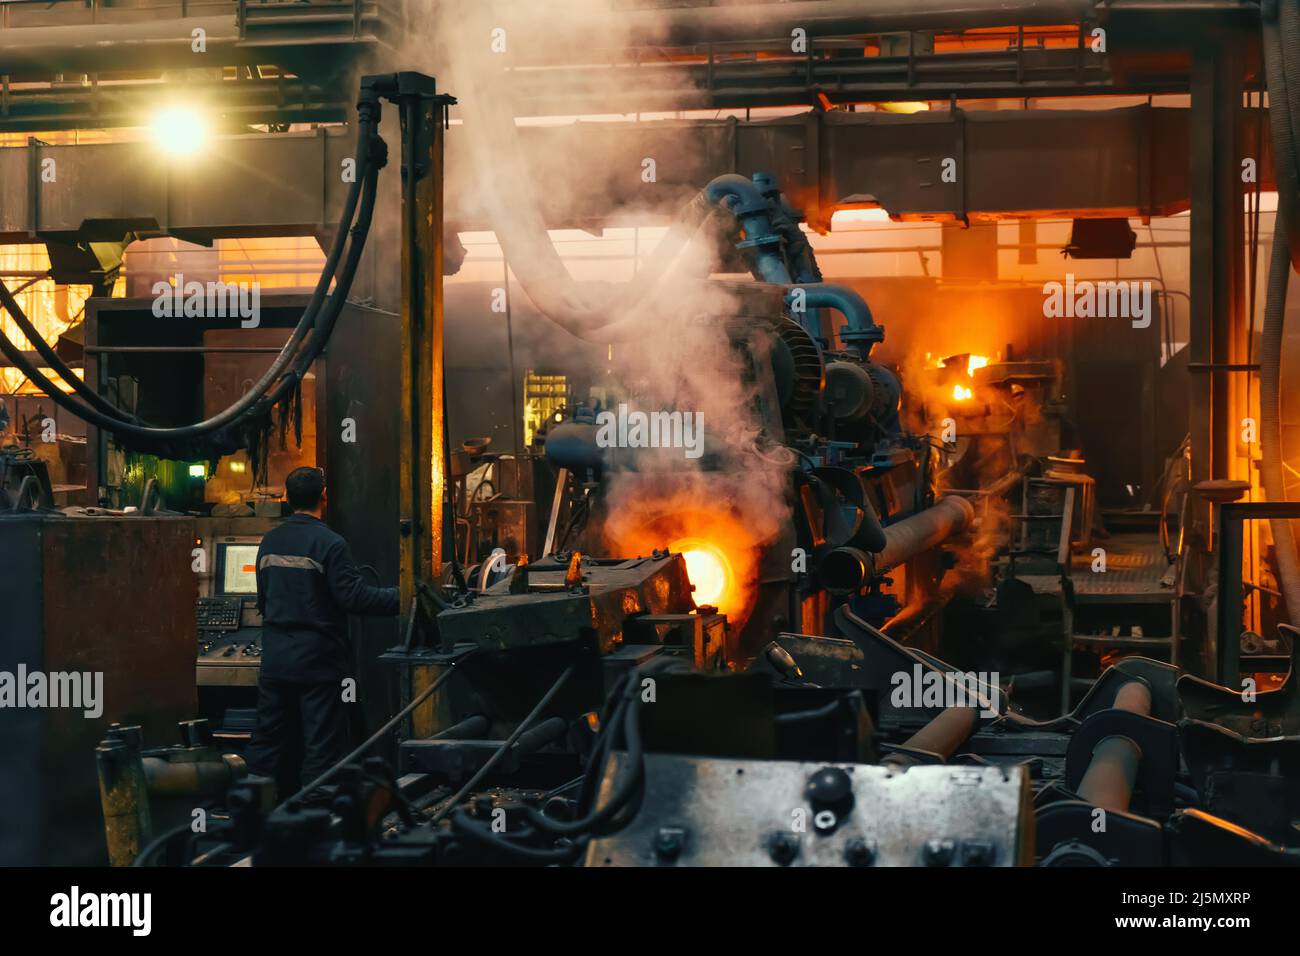 Metal casting in metallurgical plant or factory. Process of melting and forming production of iron pipes in industrial machines in workshop. Stock Photo